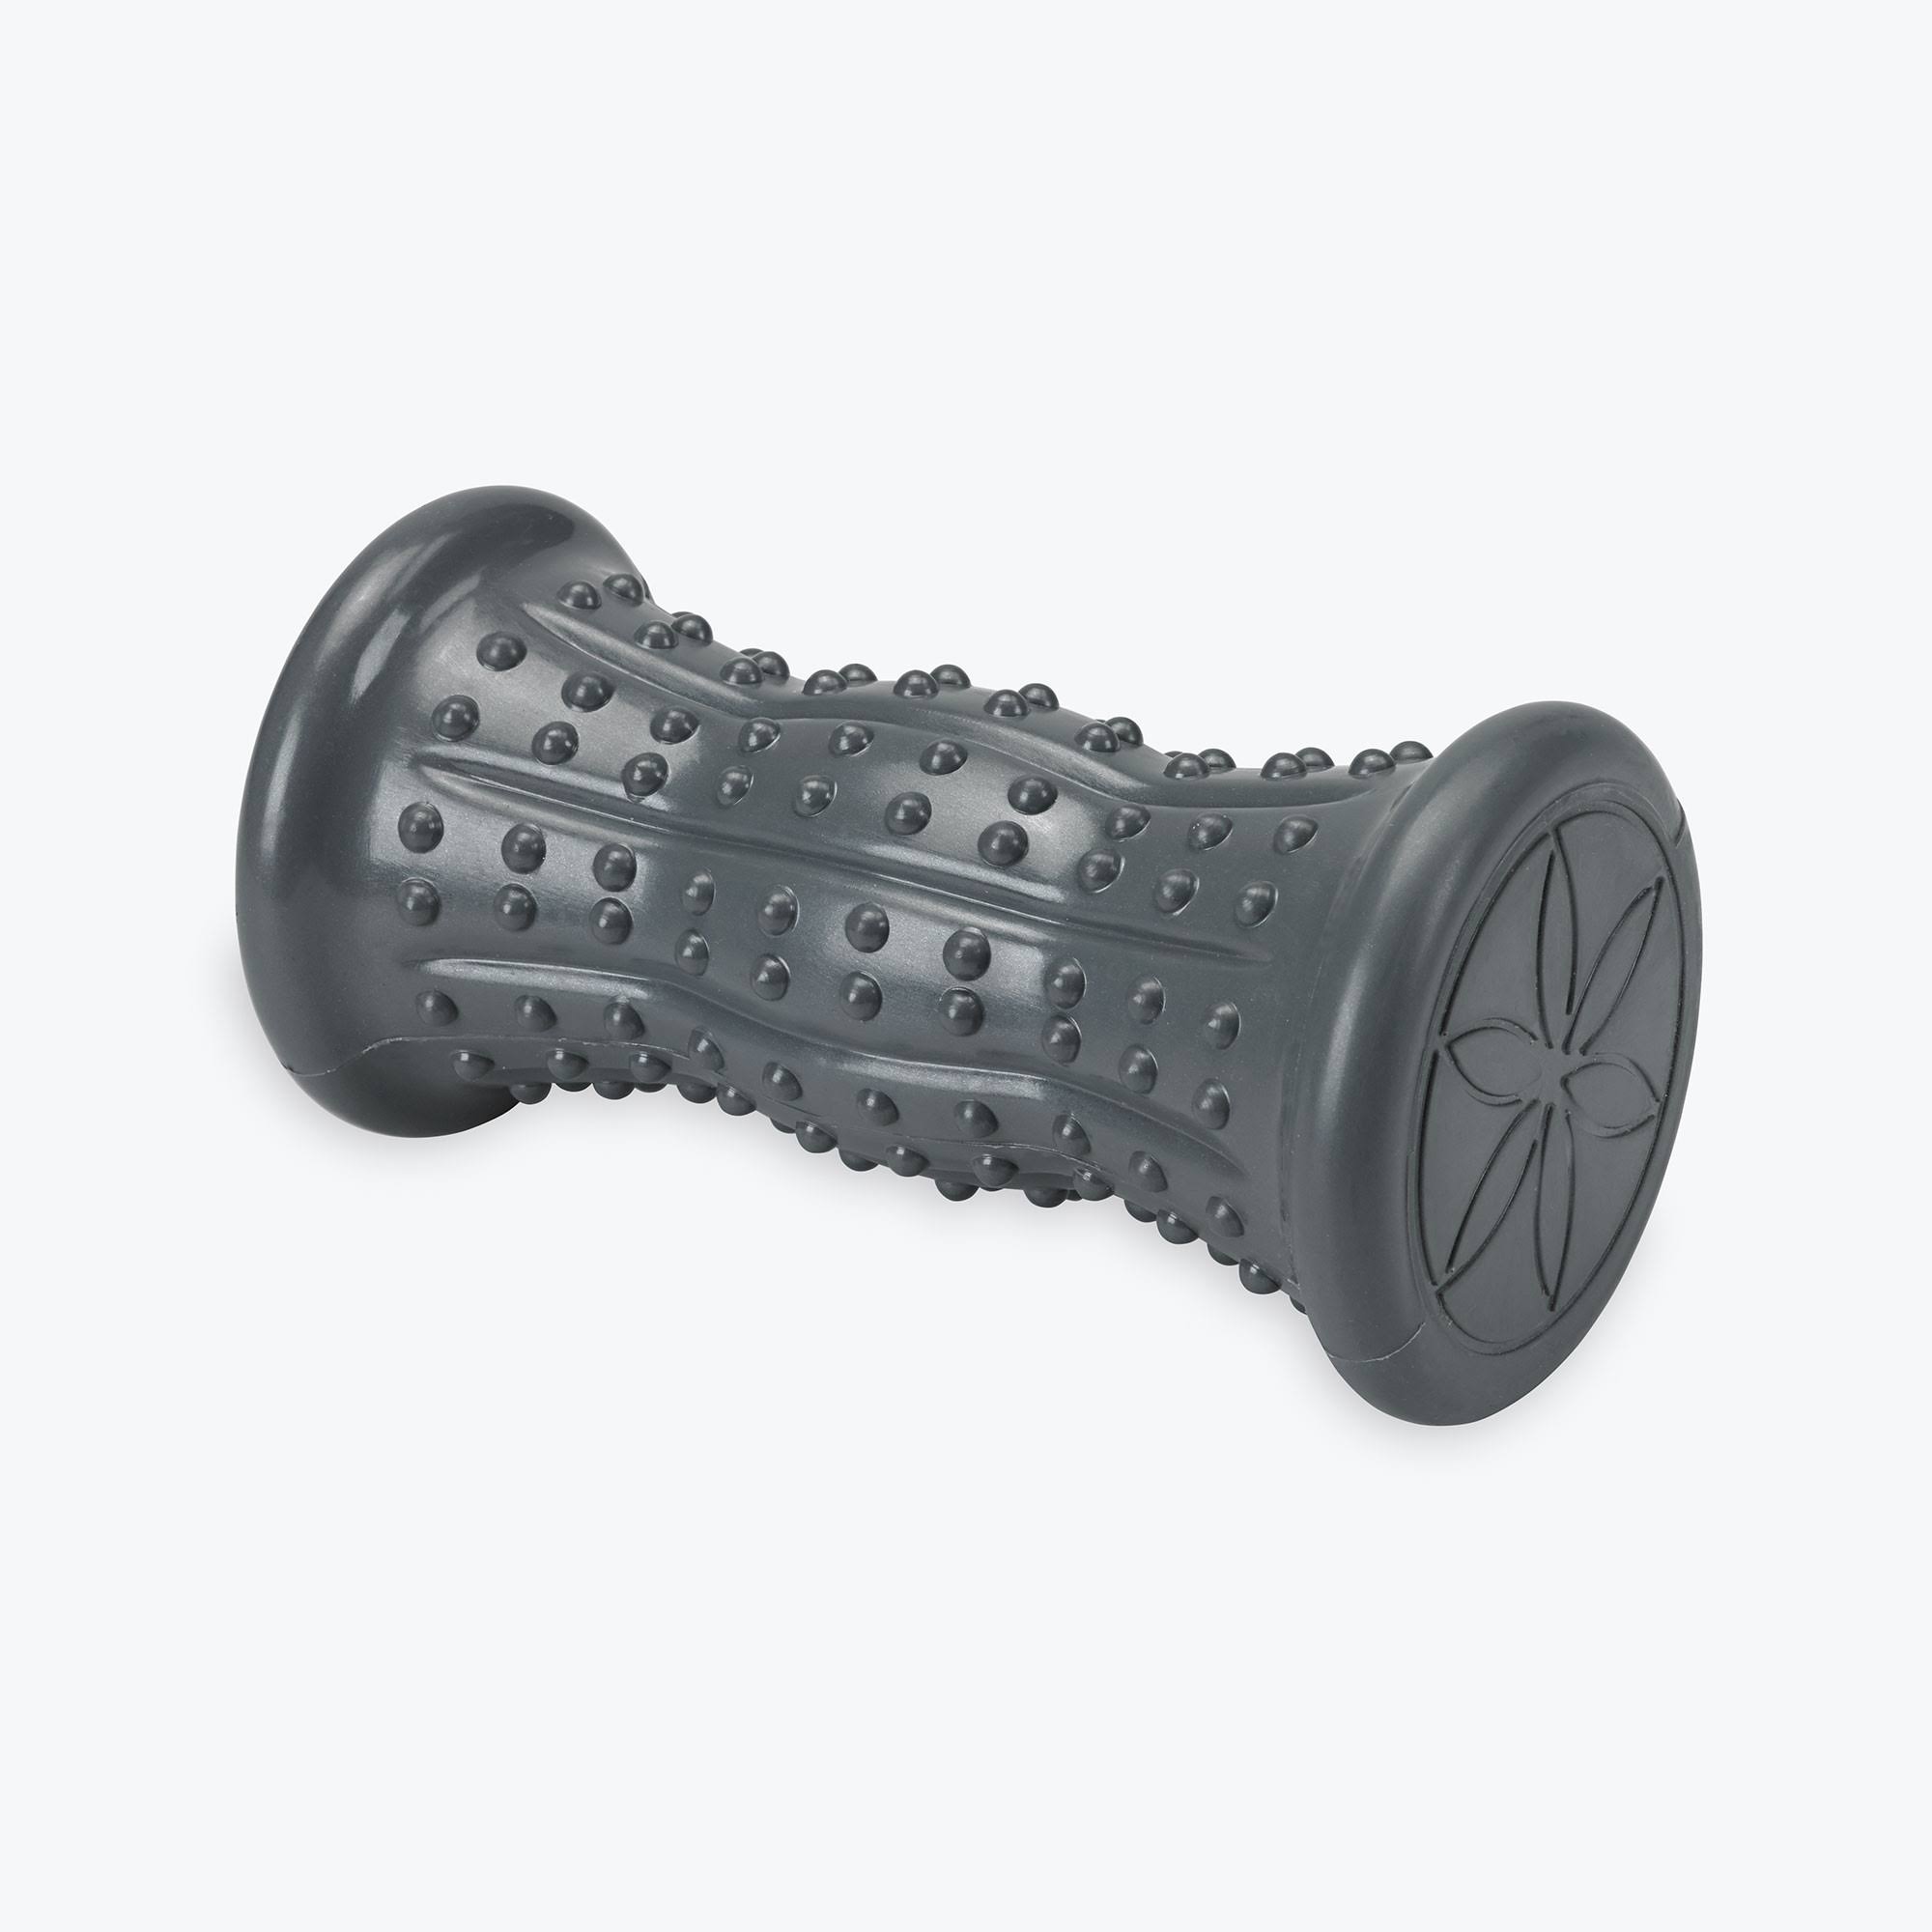 Fit For Life Hot and Cold Foot Roller